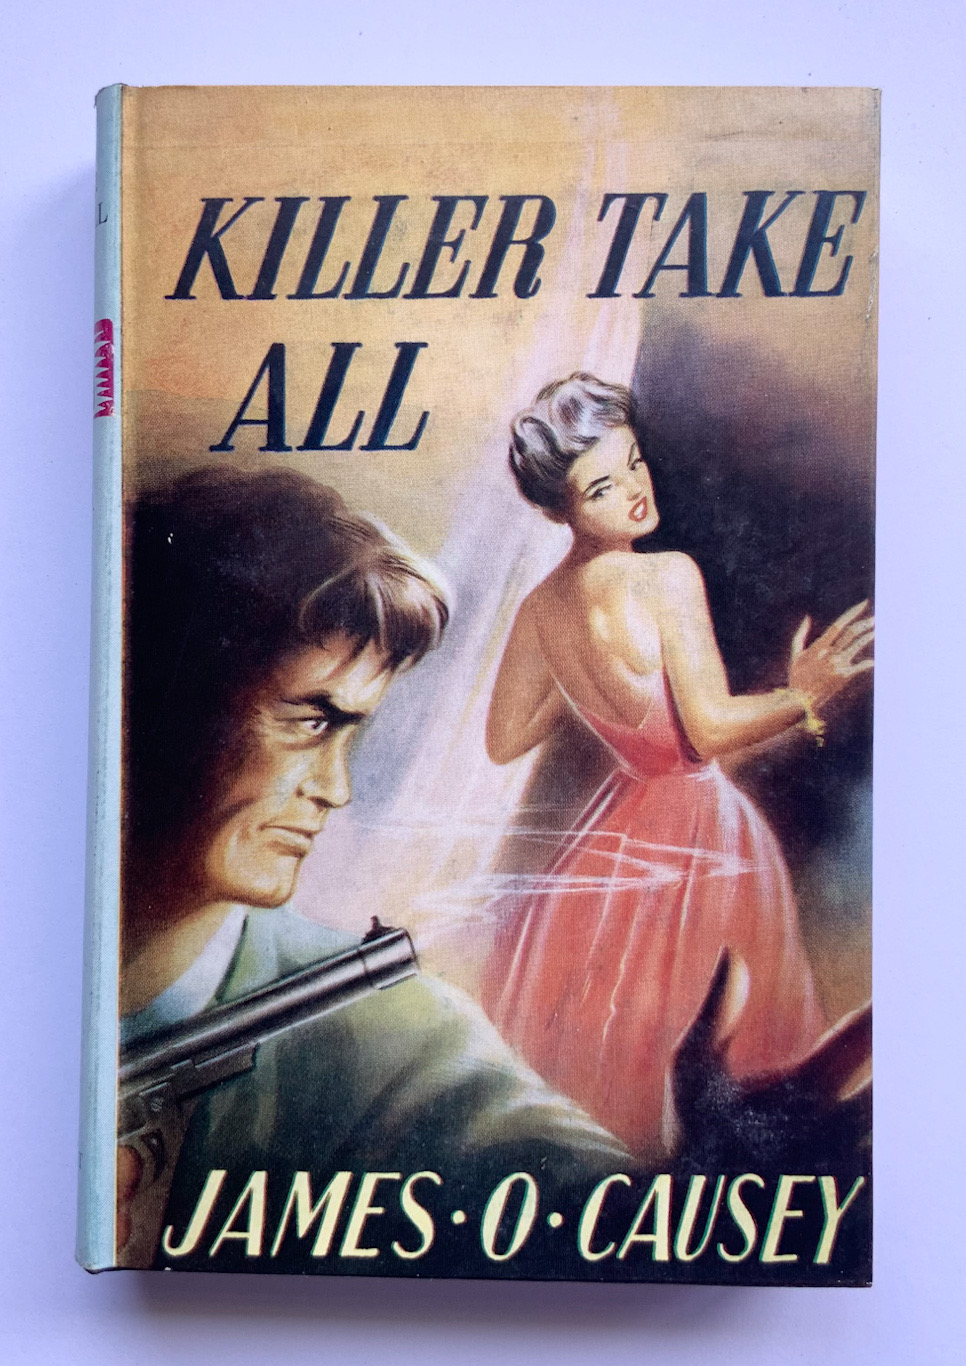 KILLER TAKE ALL British crime book by James O. Causey 1960